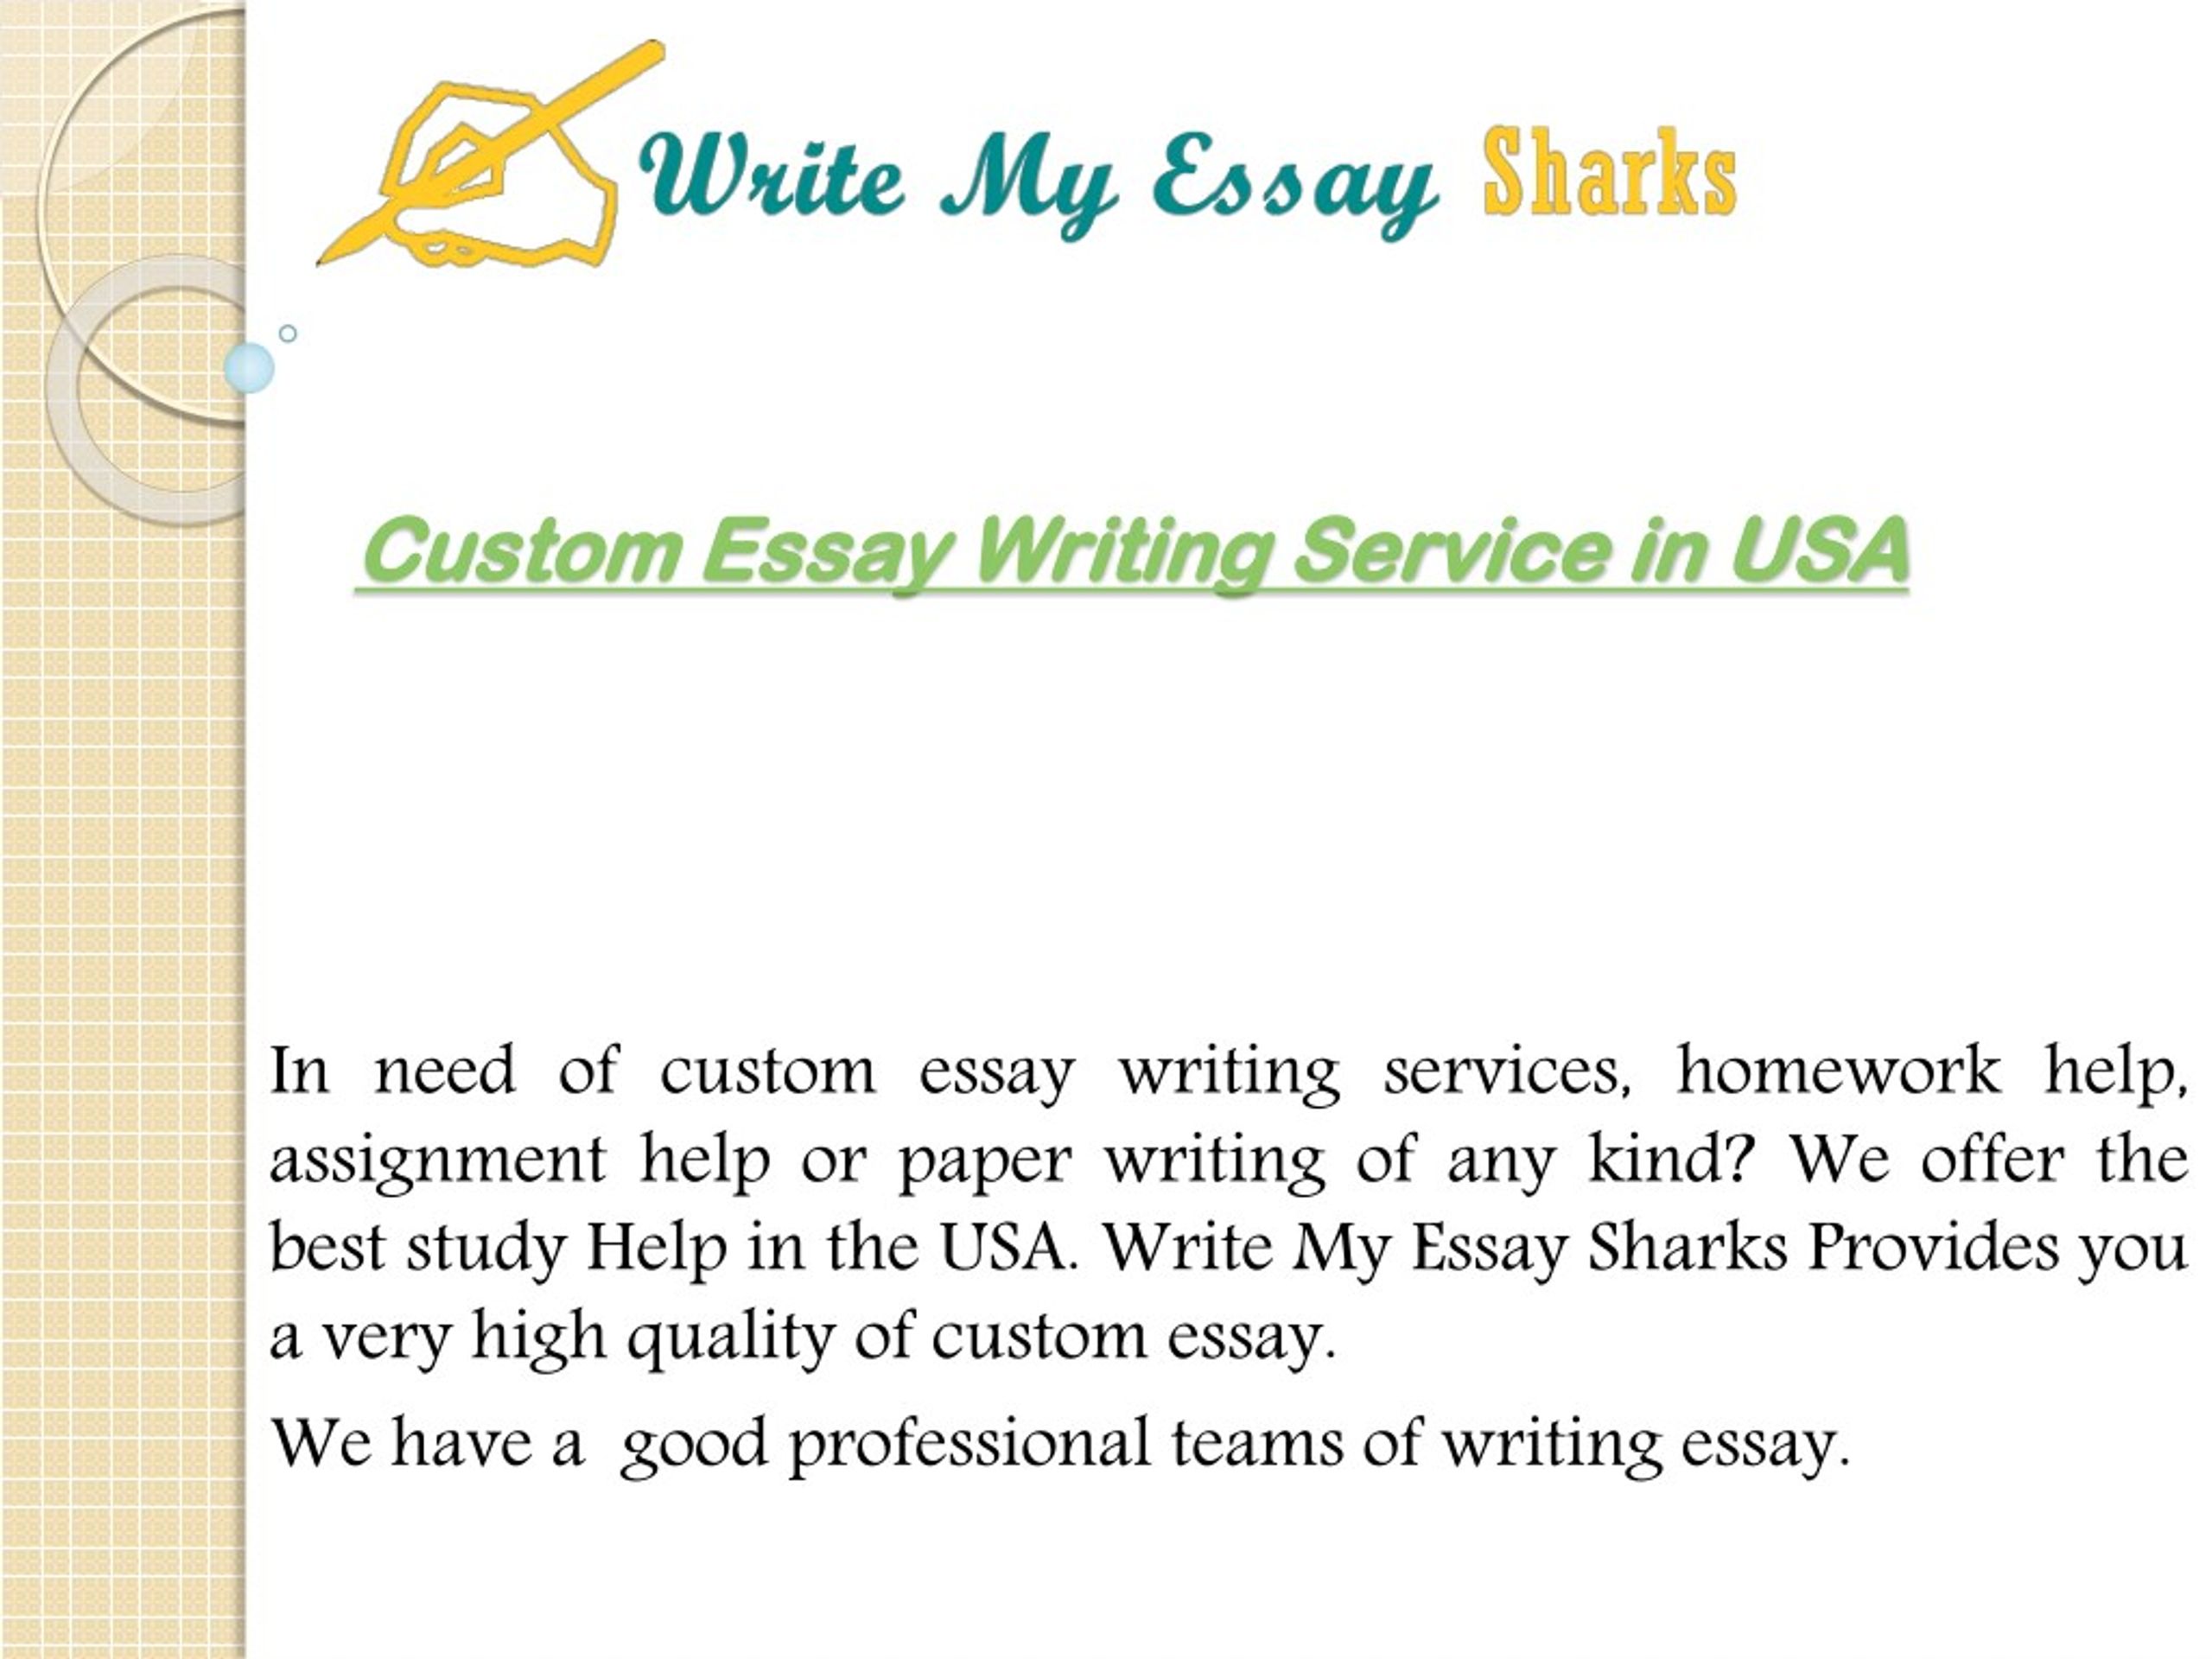 best essay writing service 2016 Is Essential For Your Success. Read This To Find Out Why